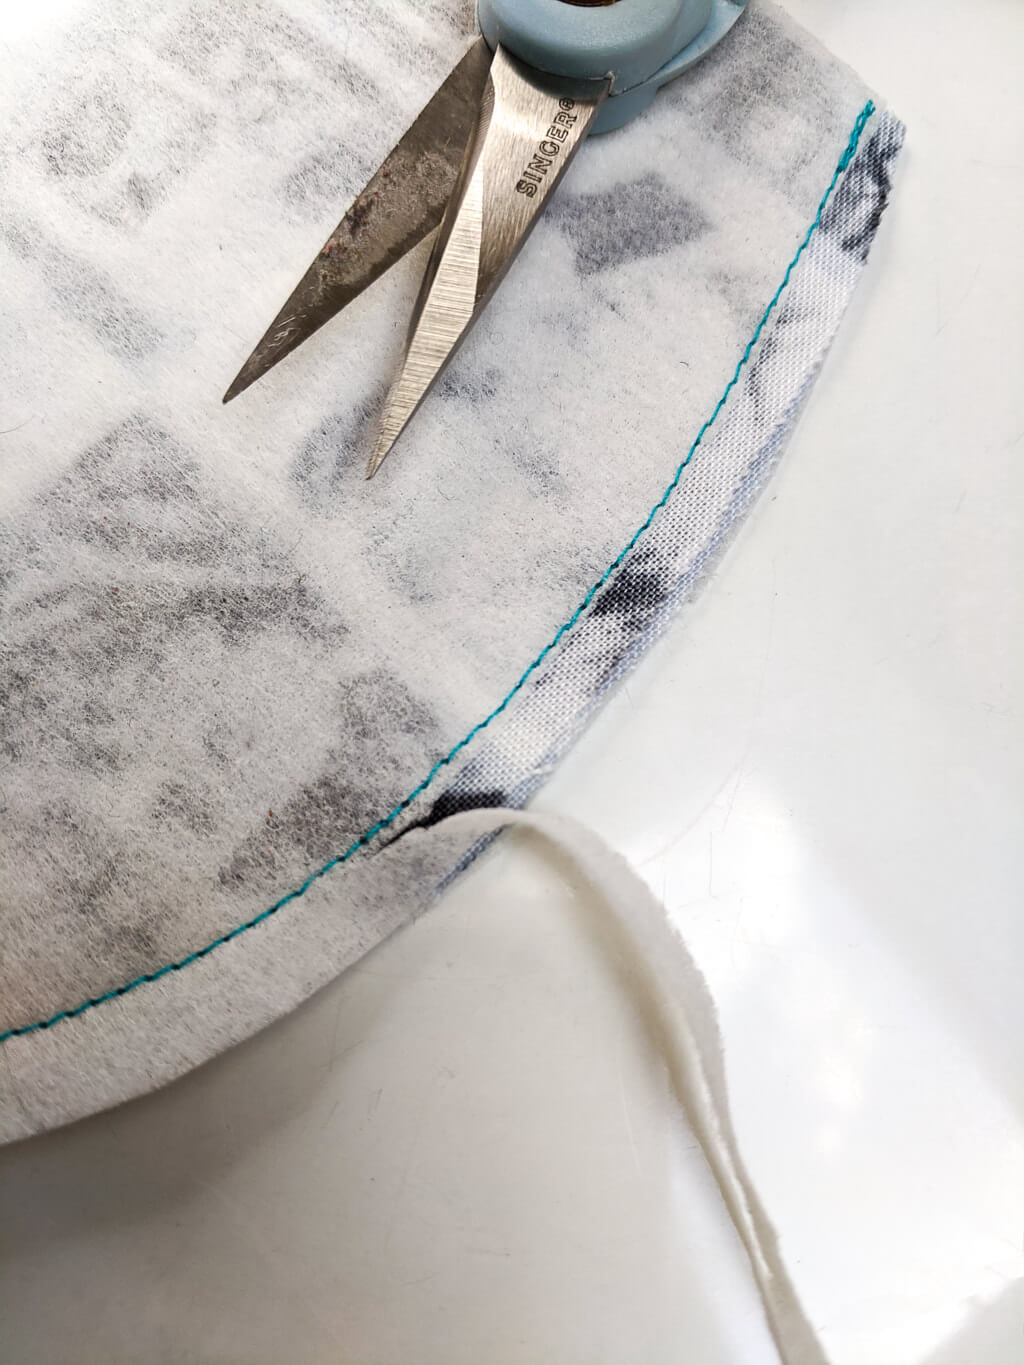 Trimming away interfacing from seams in face masks